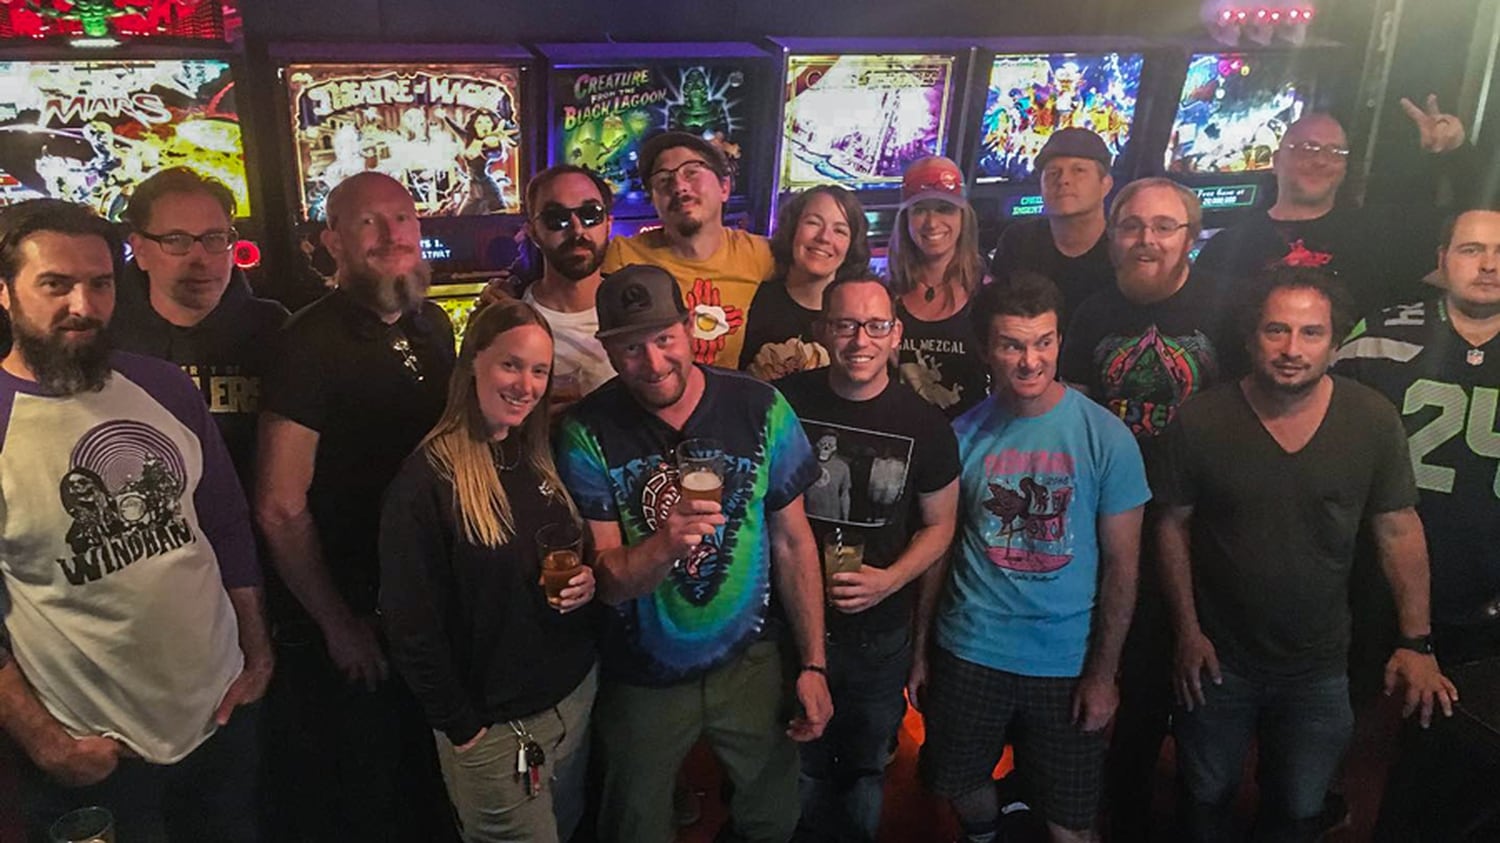 New Mexico Pinball meets at The Alley every Wednesday evening.